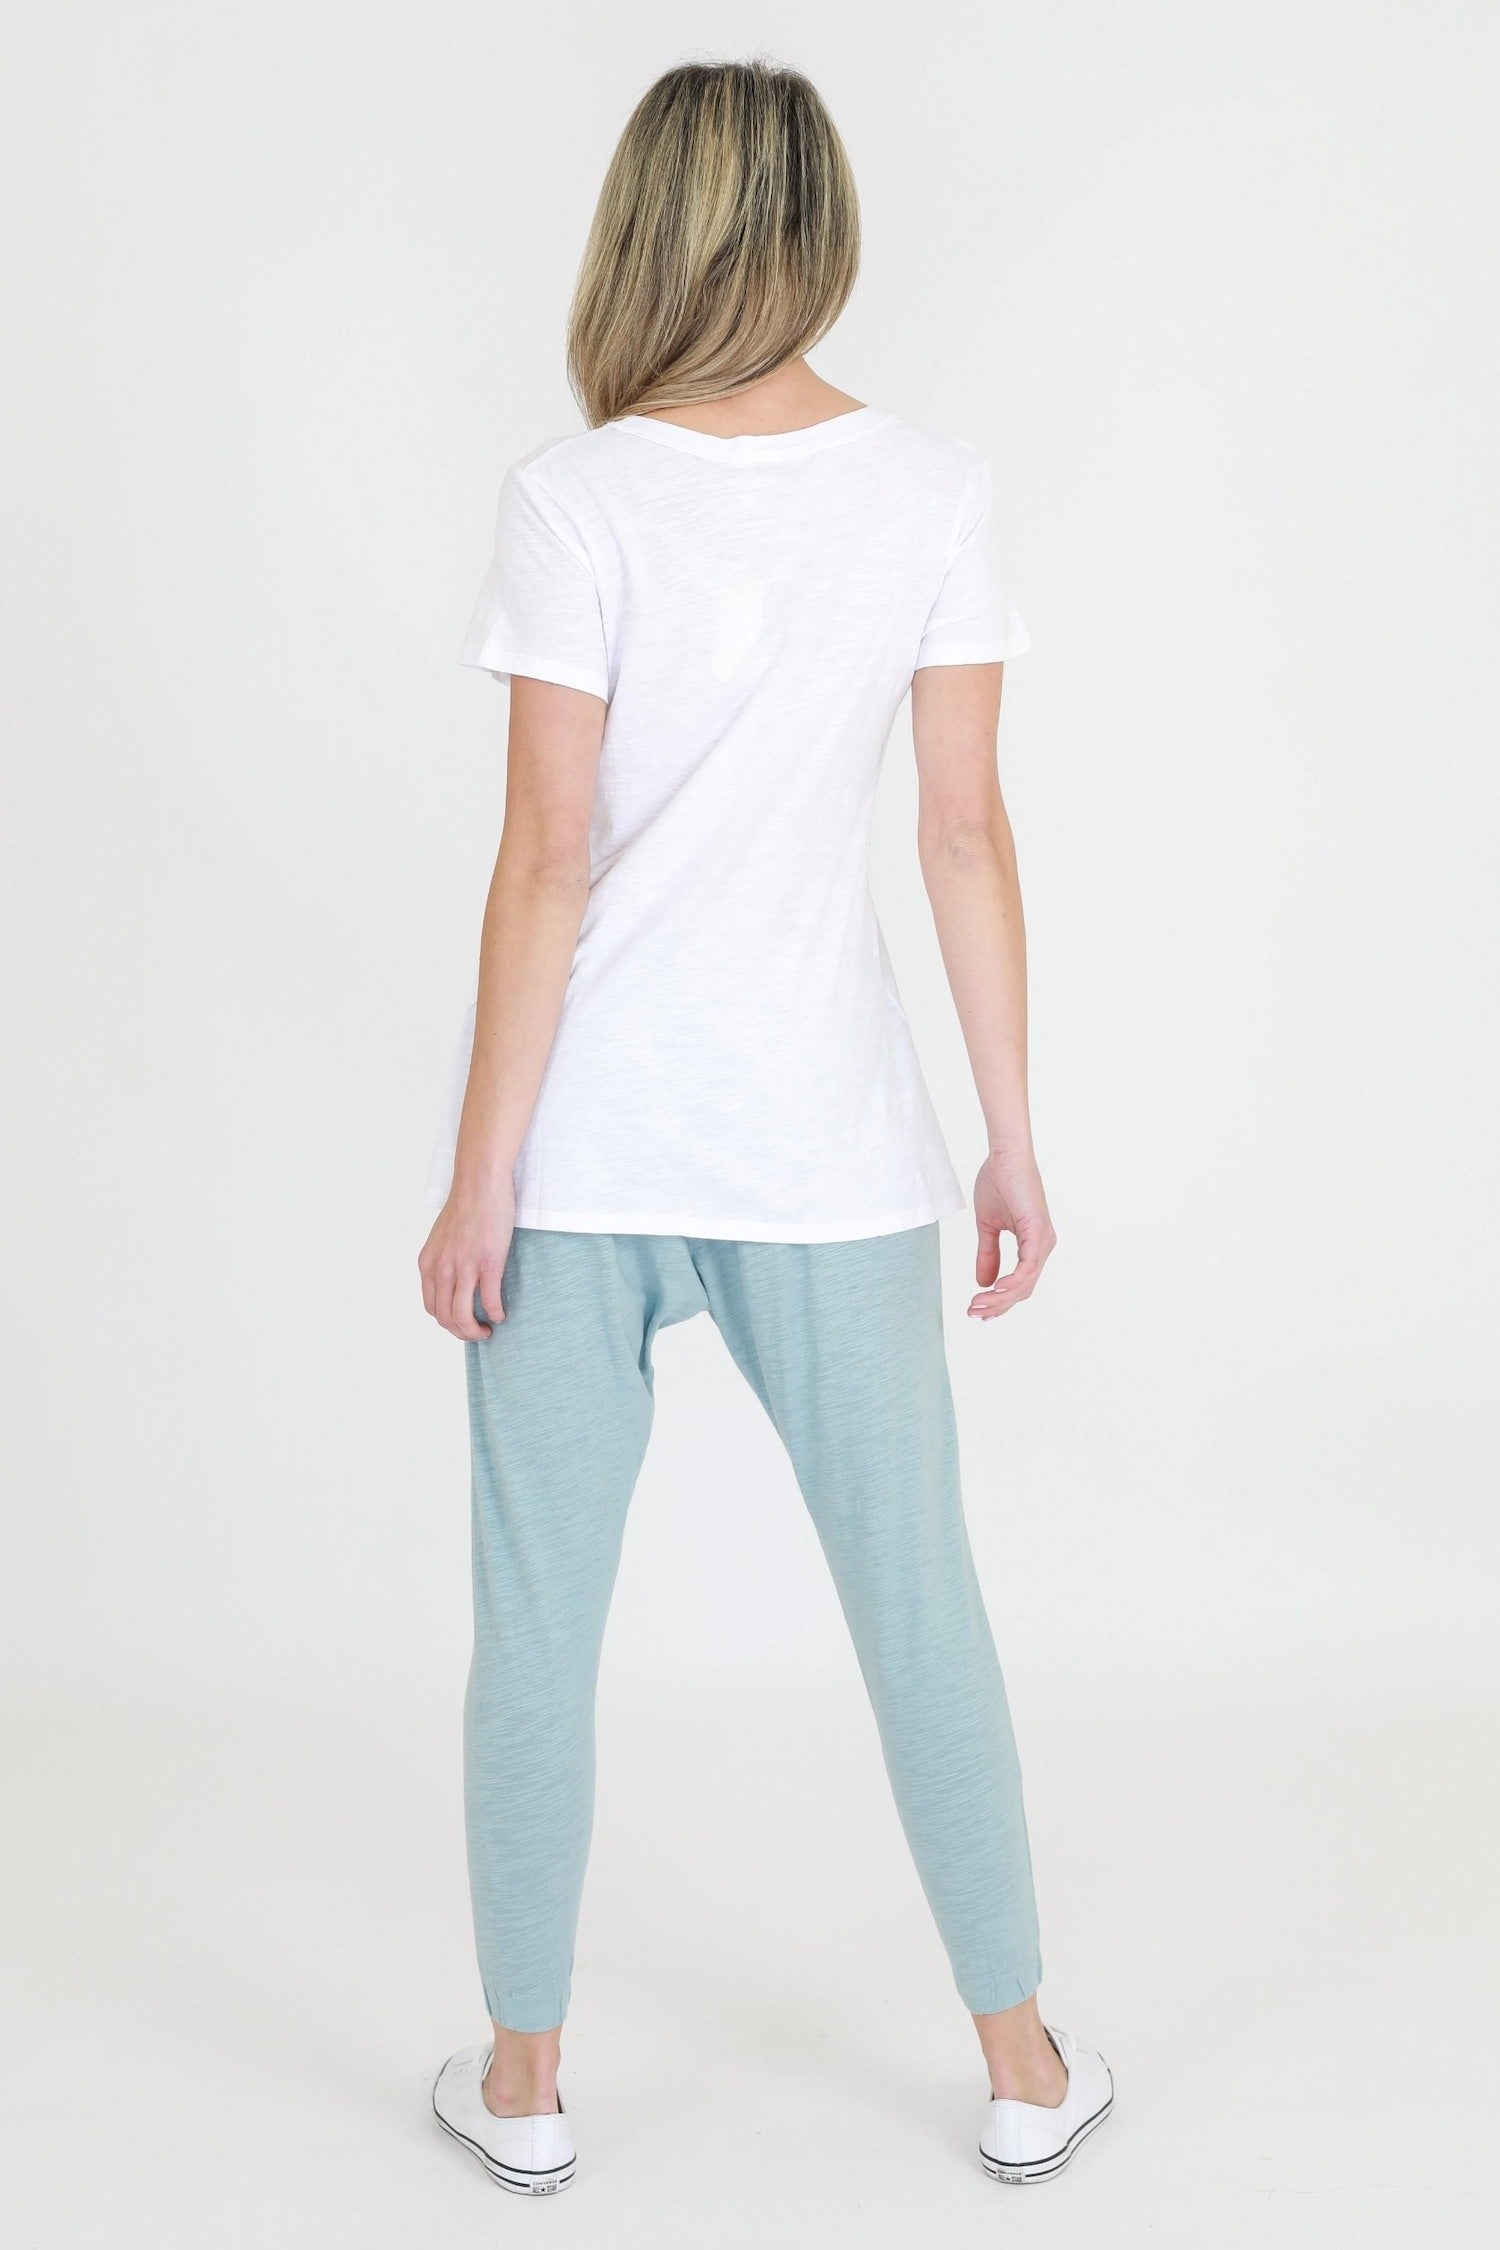 white top short sleeve #color_white